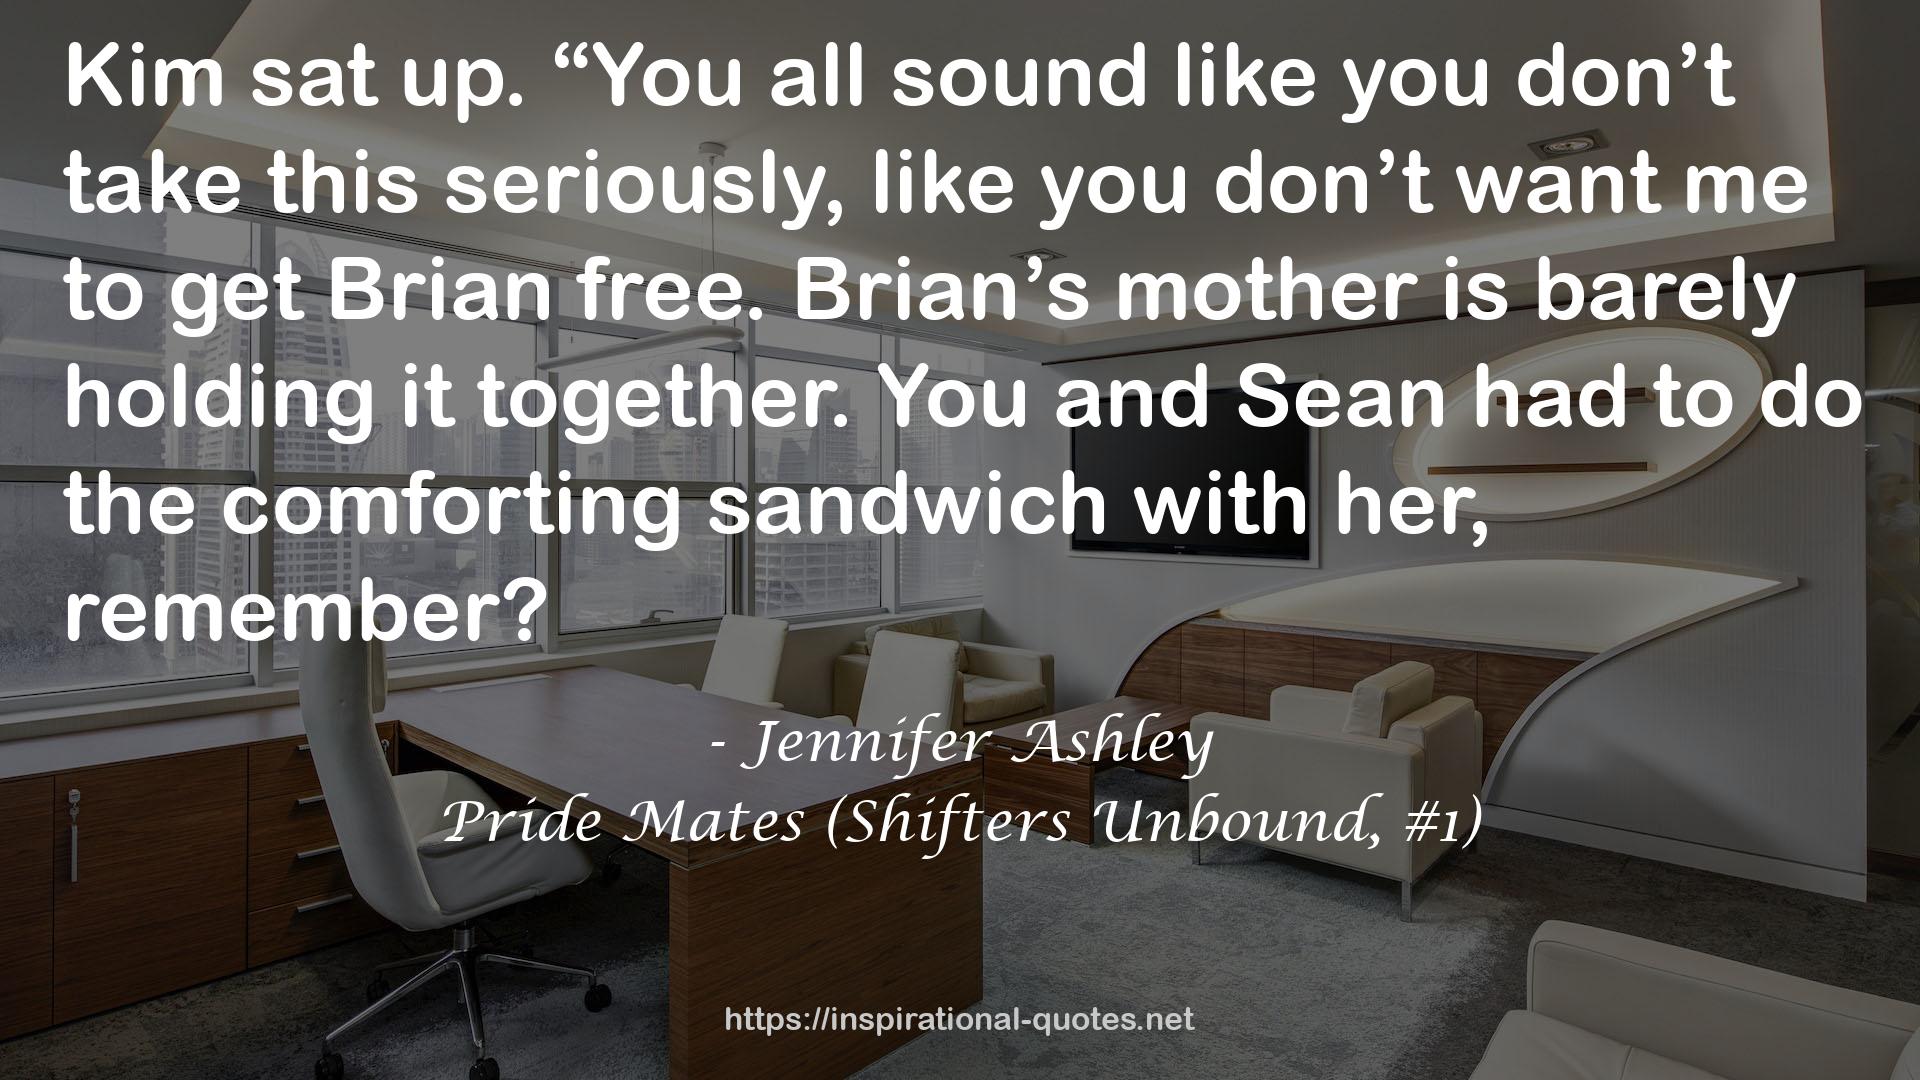 Pride Mates (Shifters Unbound, #1) QUOTES